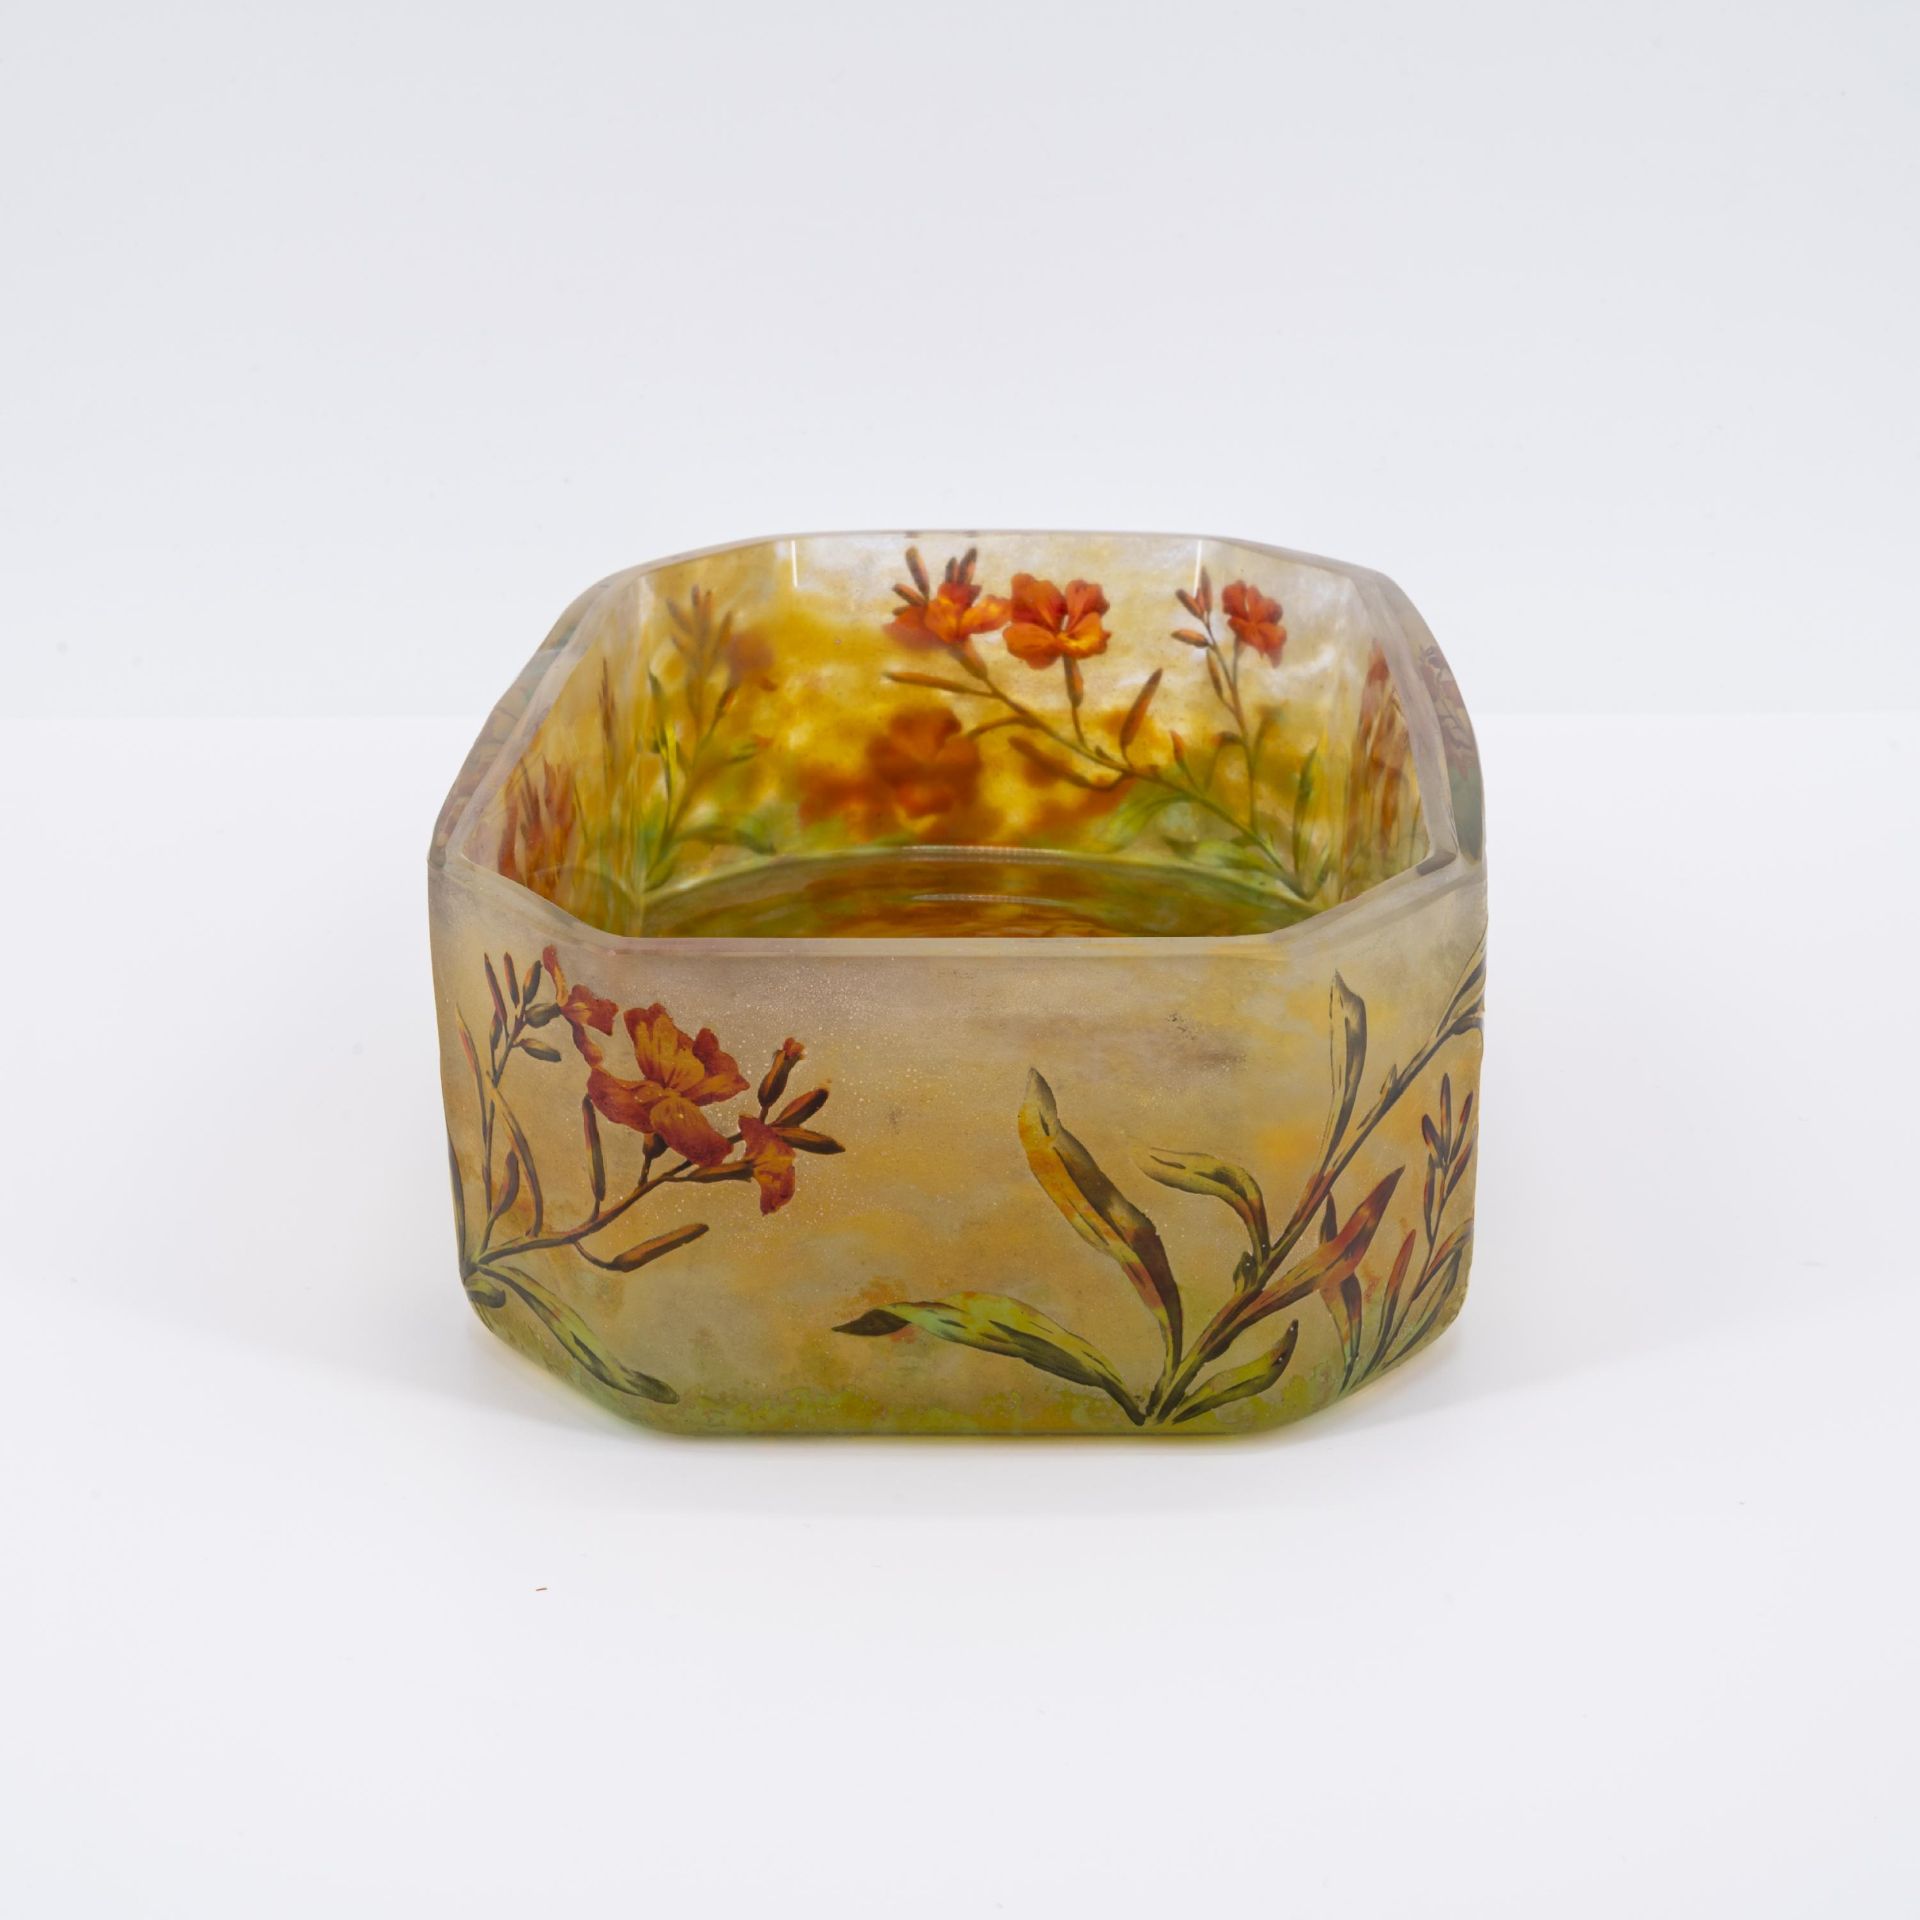 GLASS JARDINIERE WITH FLORAL DECOR - Image 2 of 7